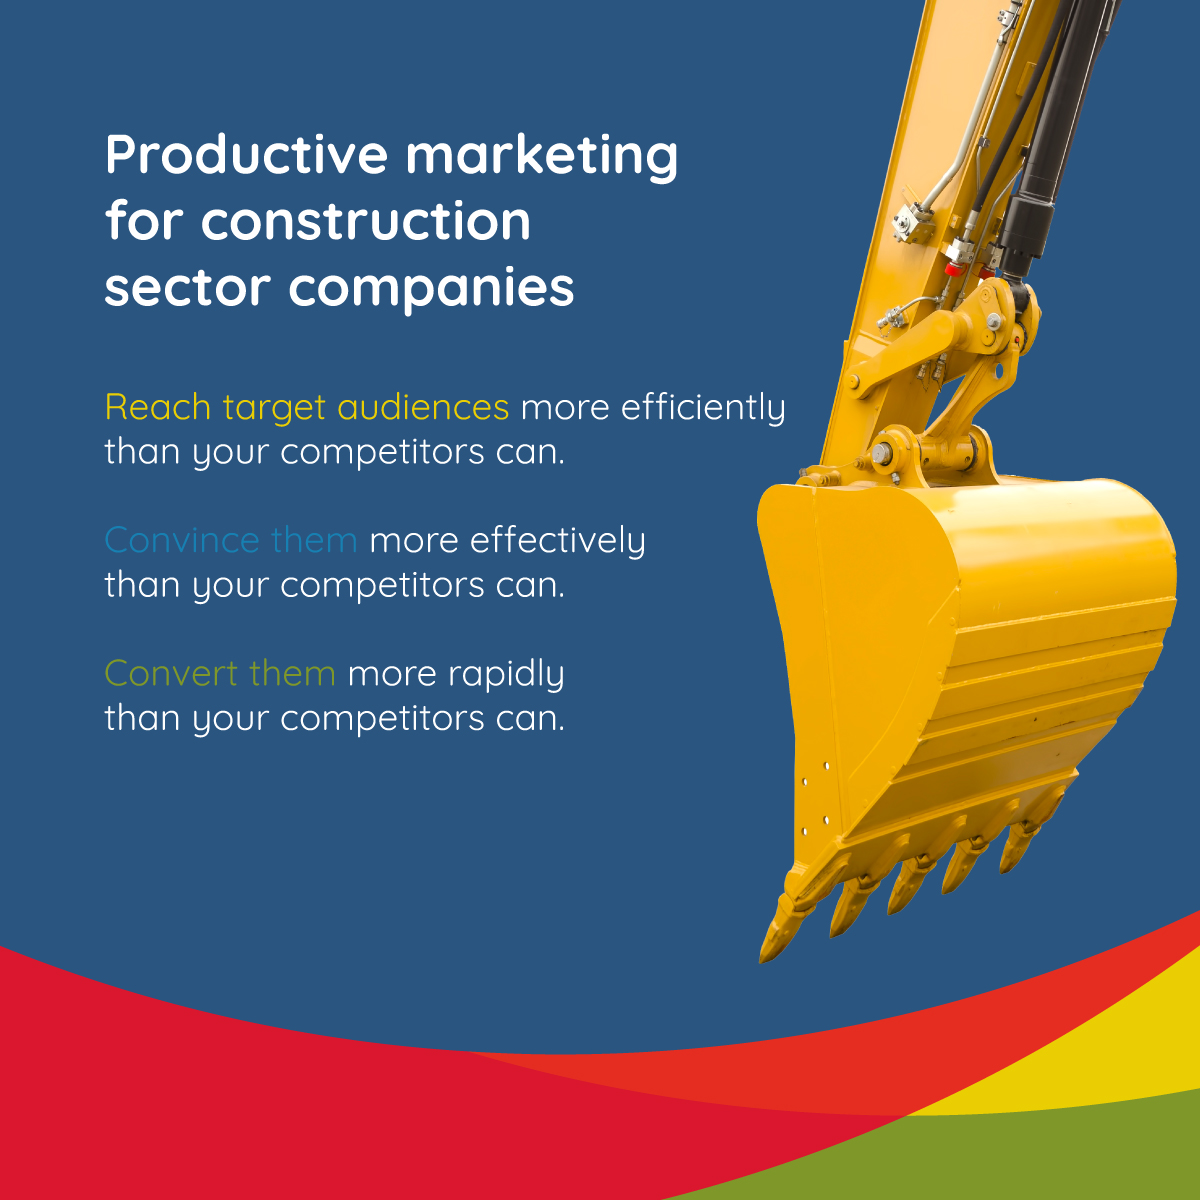 Here at BCM, we're all about delivering productive marketing for construction sector companies.

#constructionindustry #b2bmarketing #itpaystobecognitive #constructionmarketing #b2bmarketingstrategy